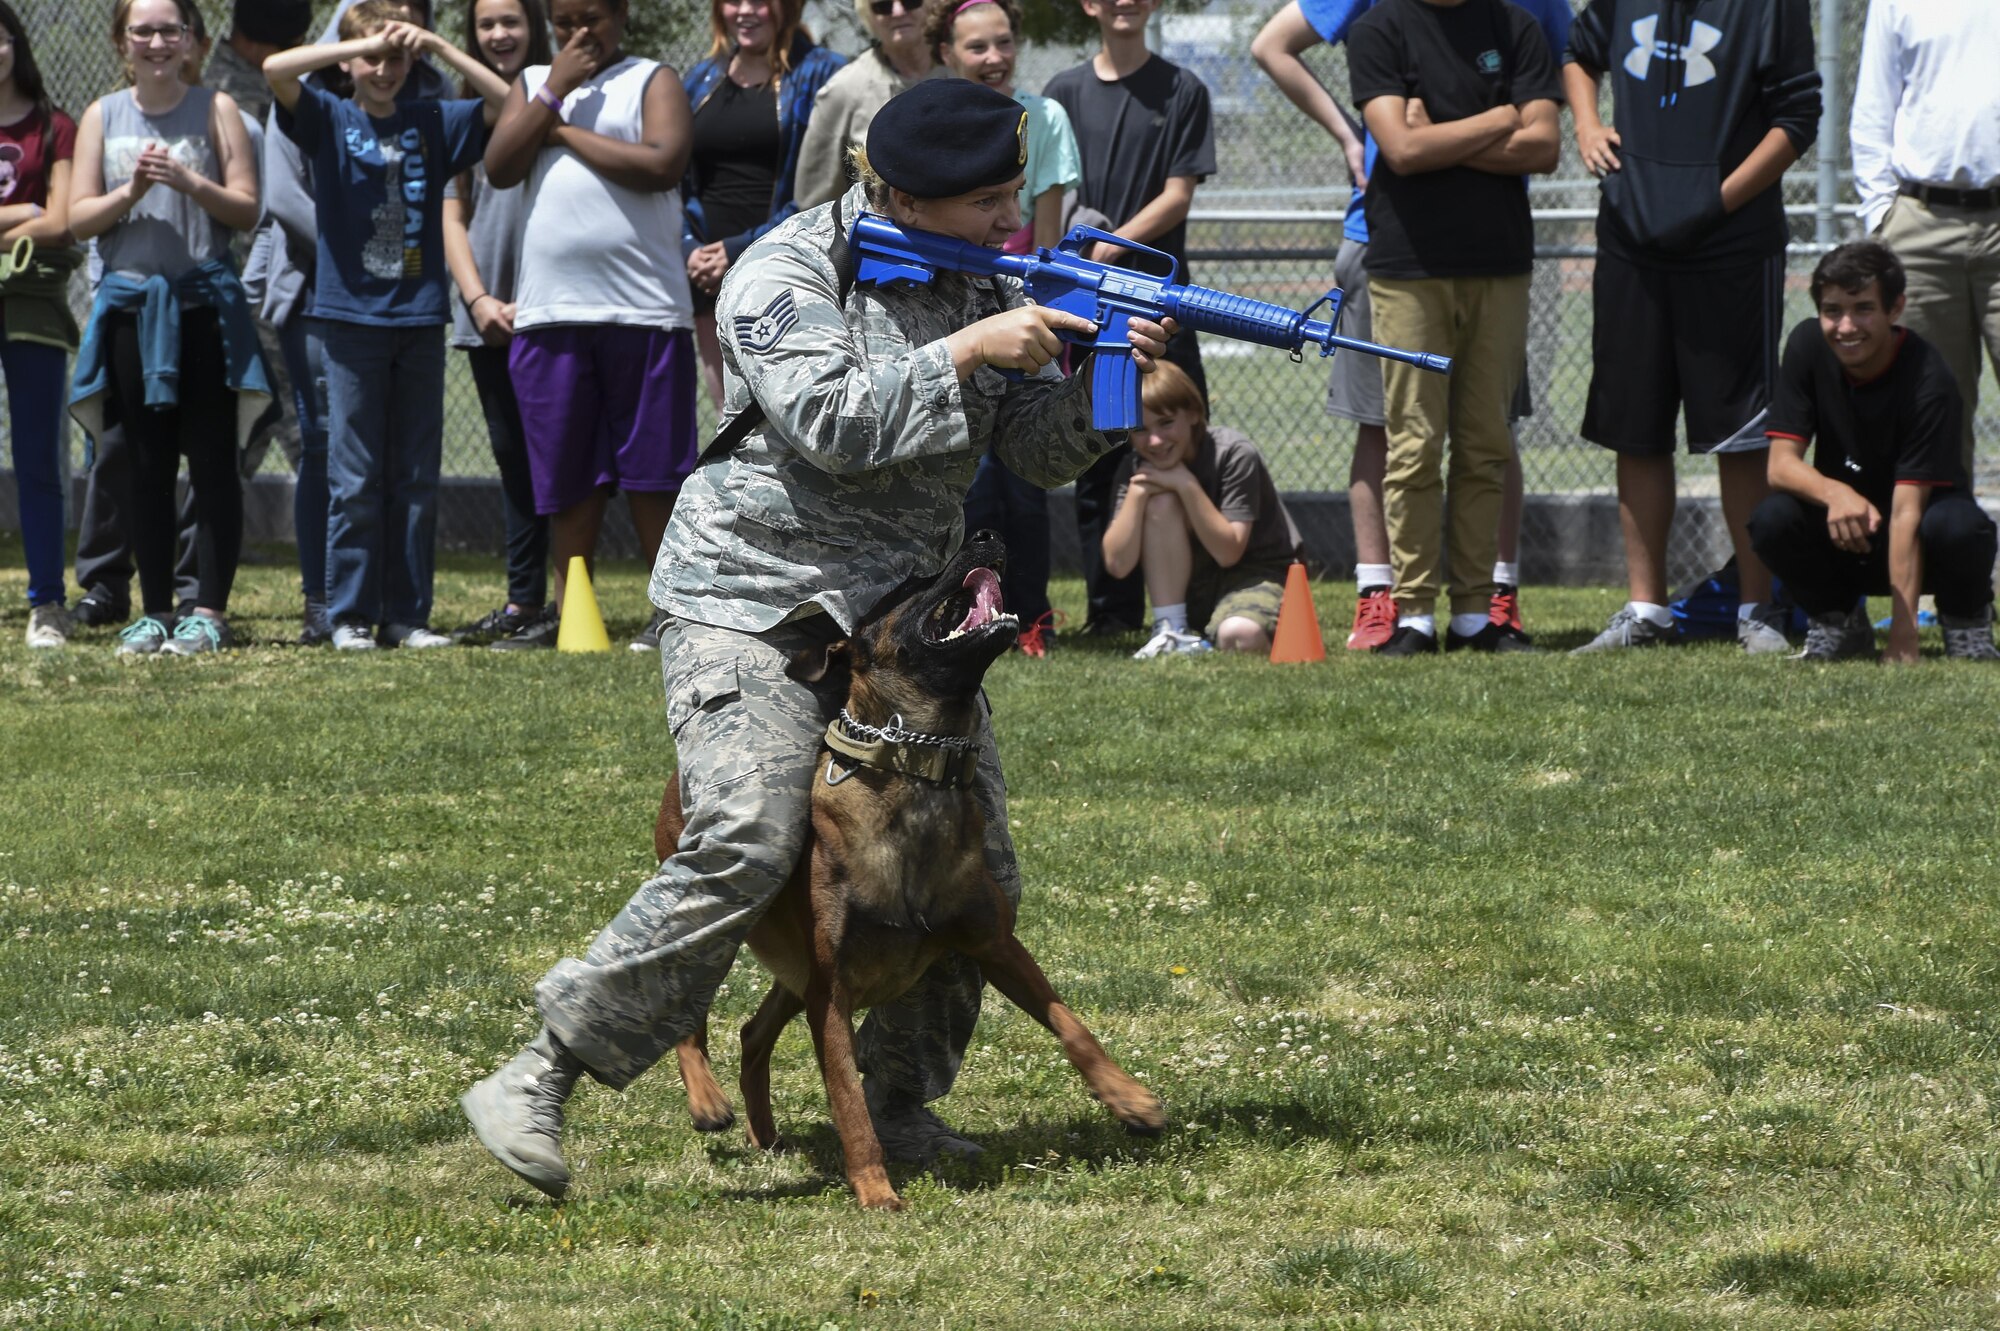 Staff Sgt. Anique, 799th Security Forces Squadron military working dog handler, and her partner MWD Samuel, give a K-9 demonstration at a local high school March 17, 2016 in Indian Springs, Nevada. MWDs and their handlers train together to protect military personnel and equipment, detect explosives and conduct search and rescue operations during disasters. (U.S. Air Force photo by Senior Airman Adarius Petty/Released)